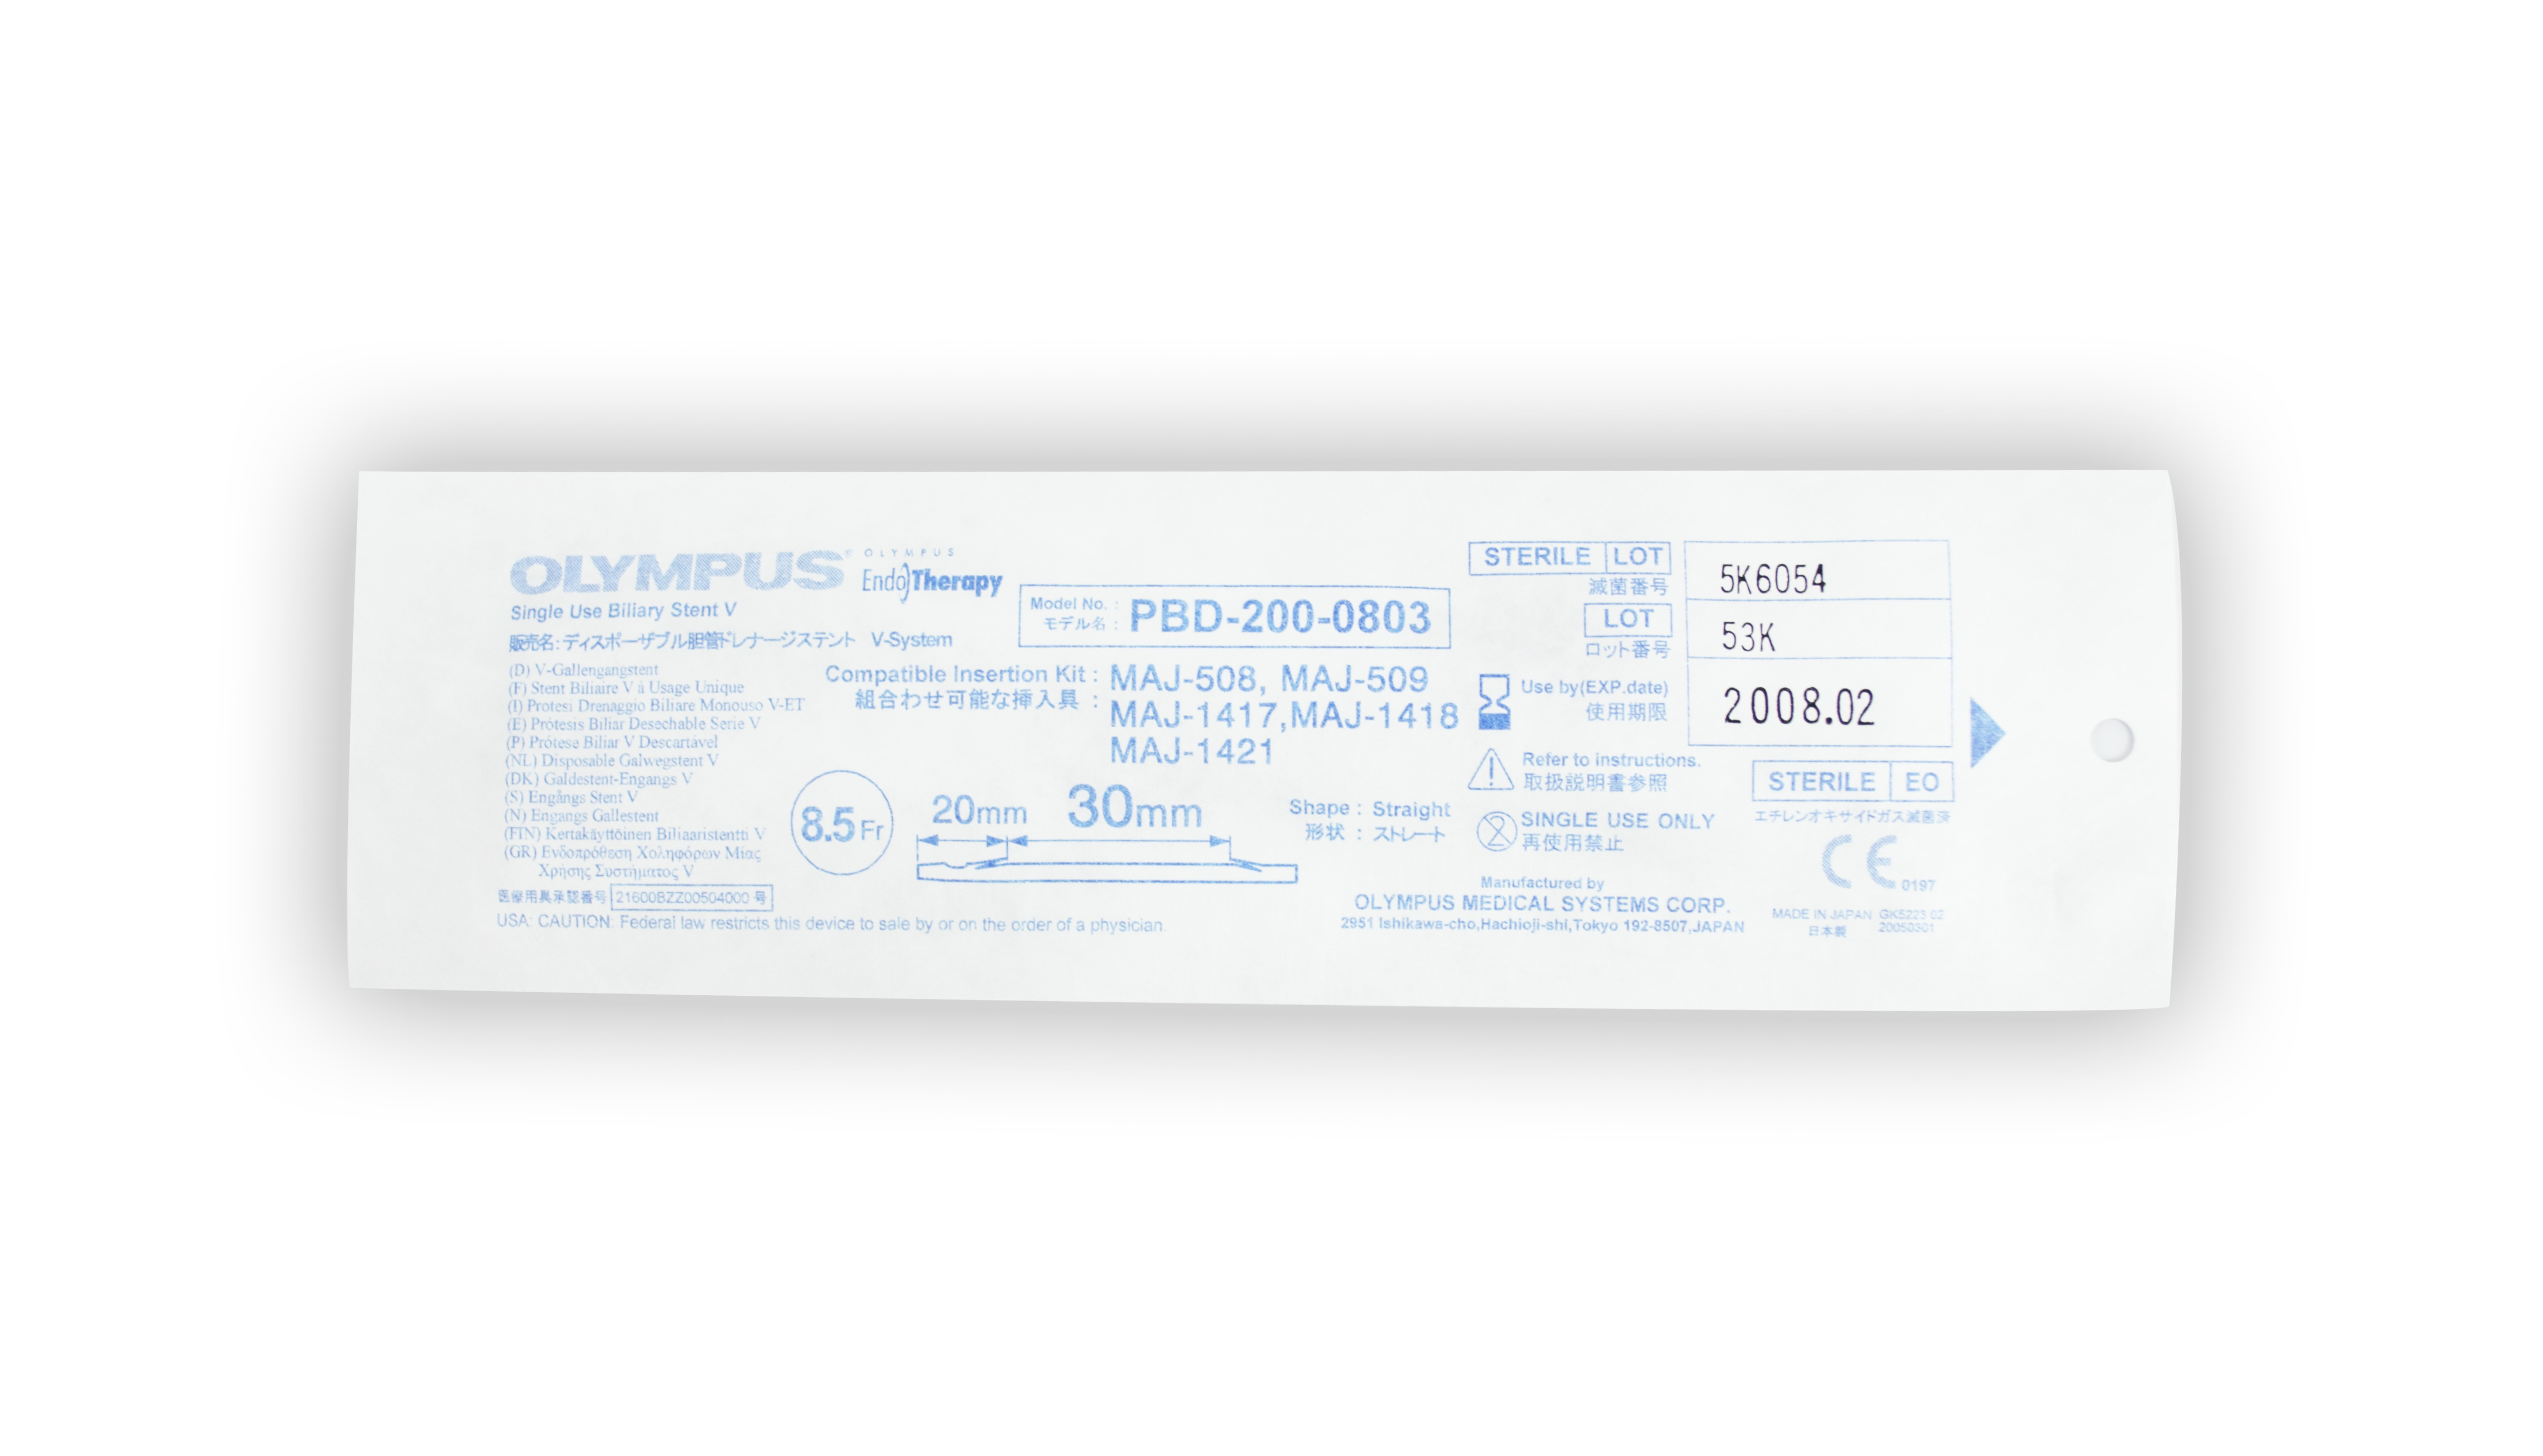 [Out-of-Date] Olympus Disposable Biliary Drainage Tube - PBD-200-0803